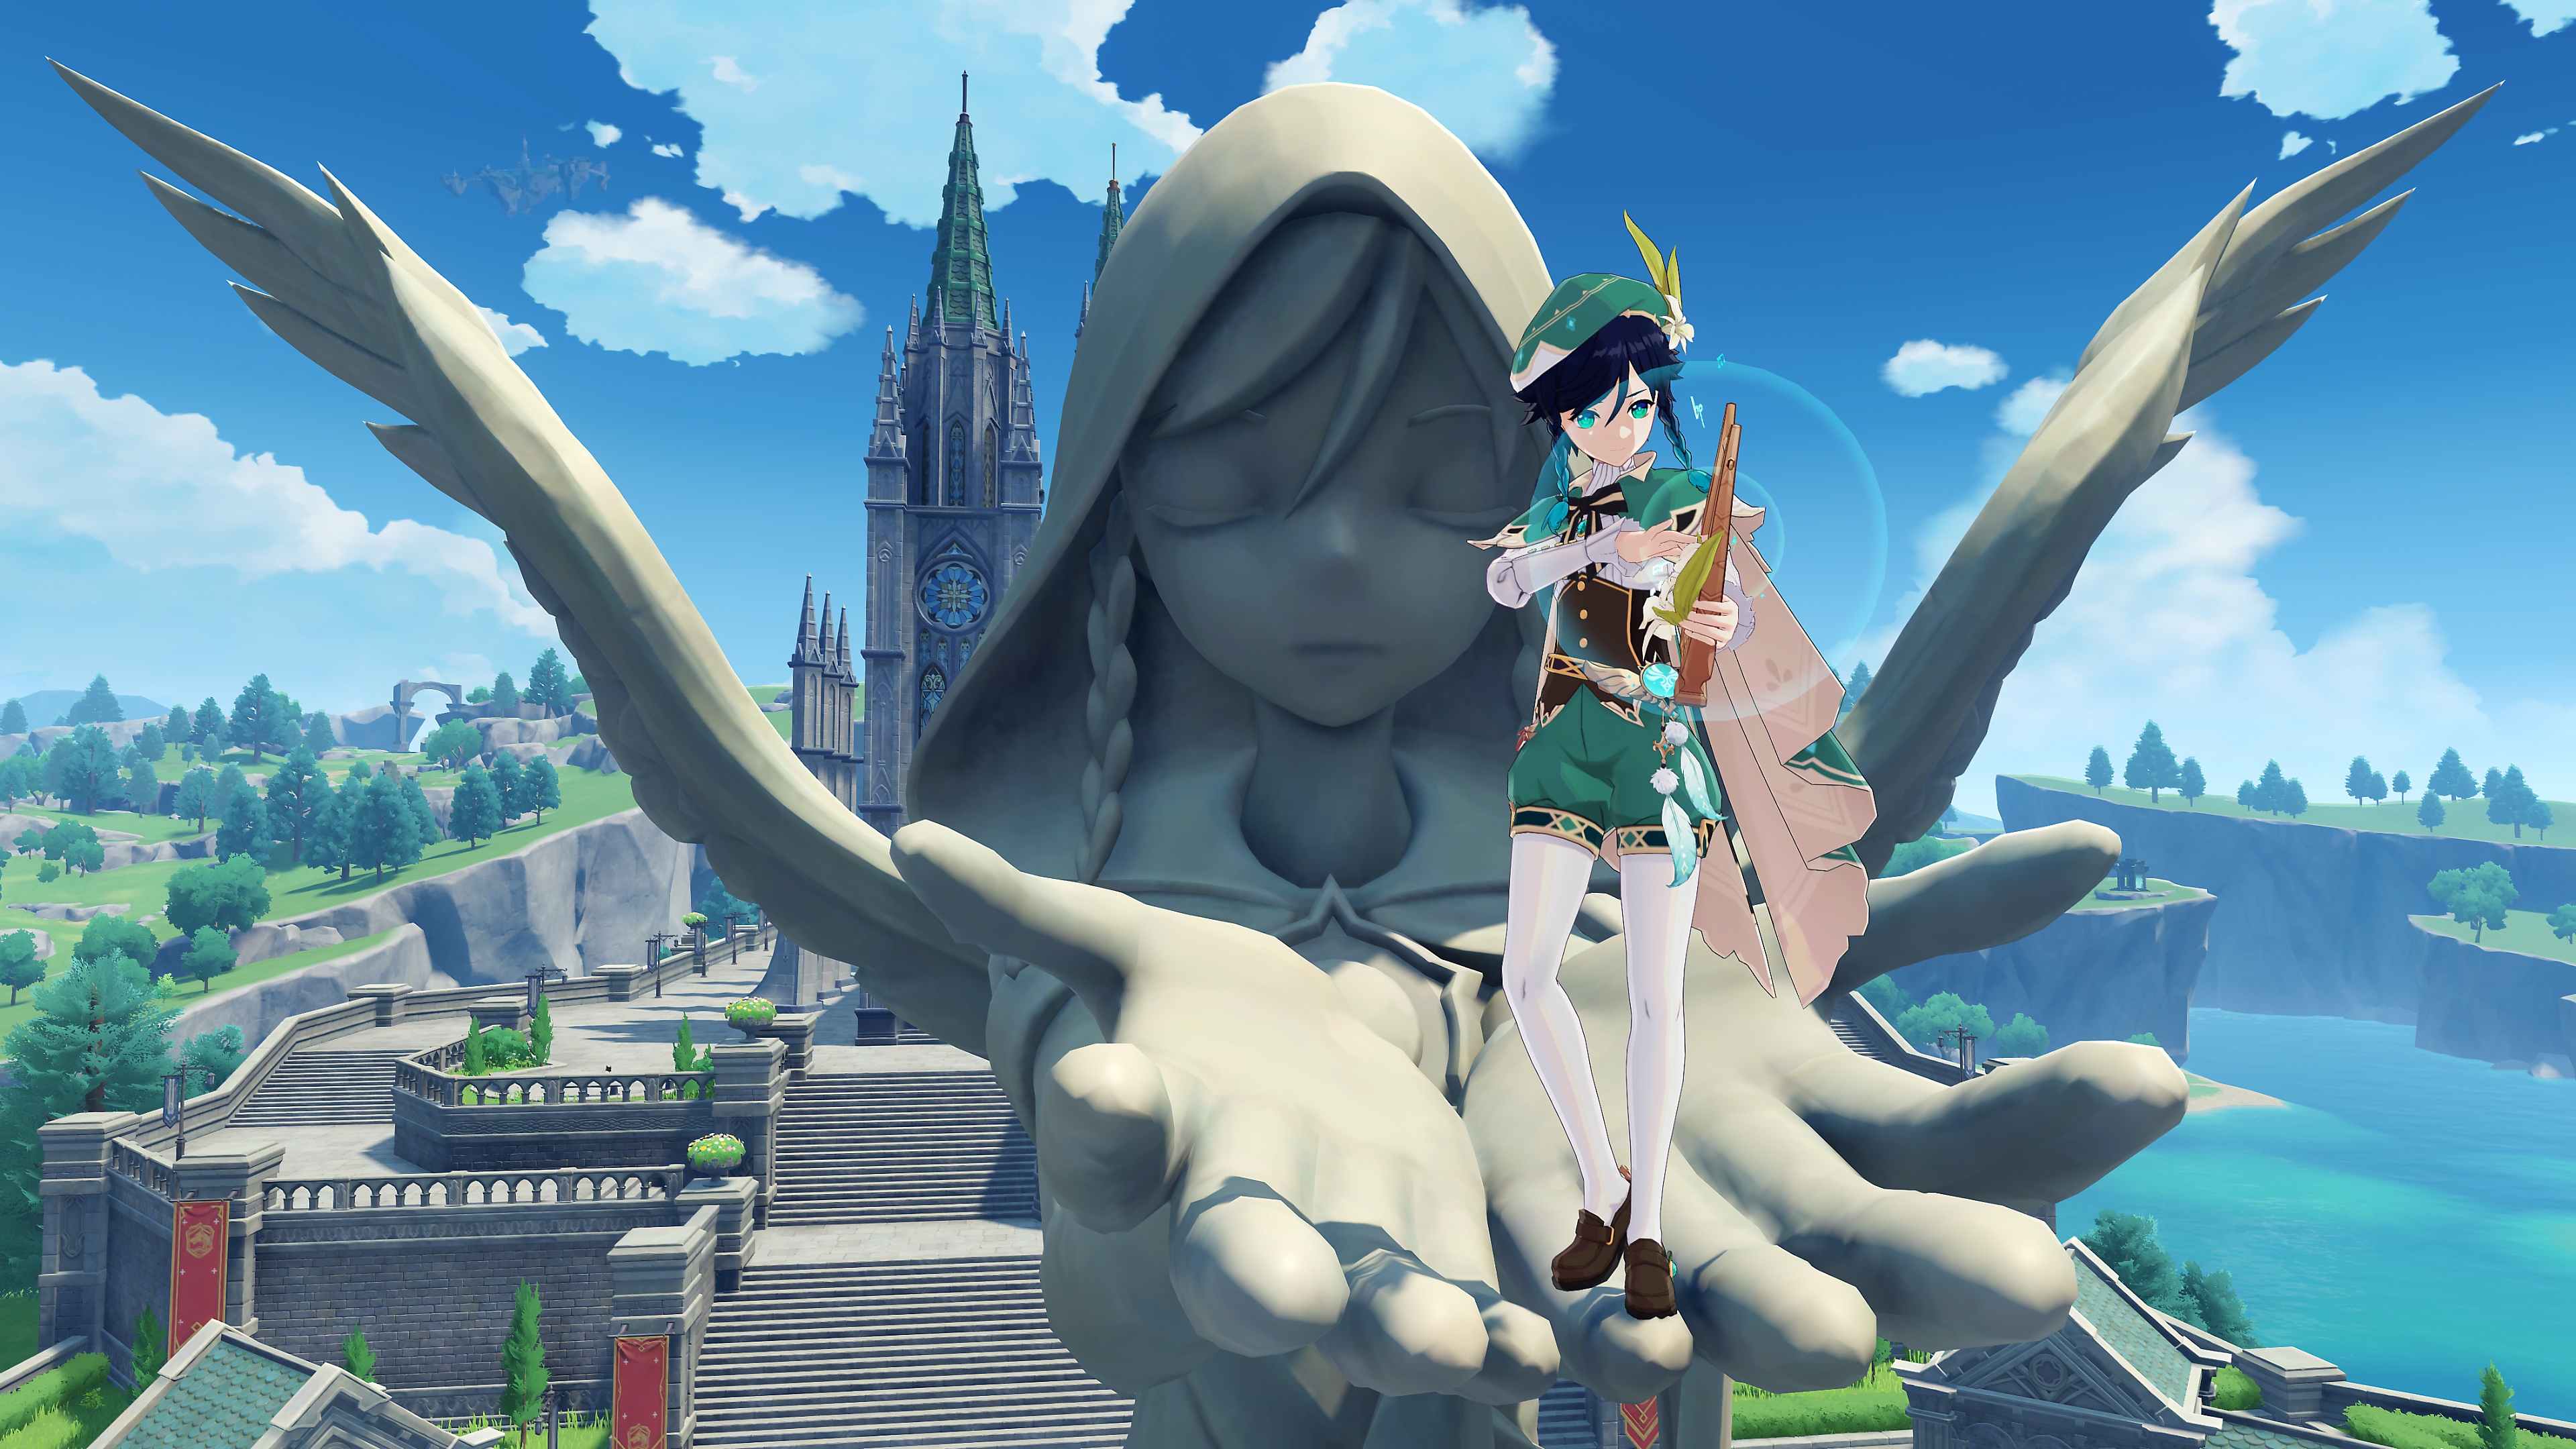 Genshin Impact: 2.6 Update screenshot showing a character standing in the hands of large stone statue